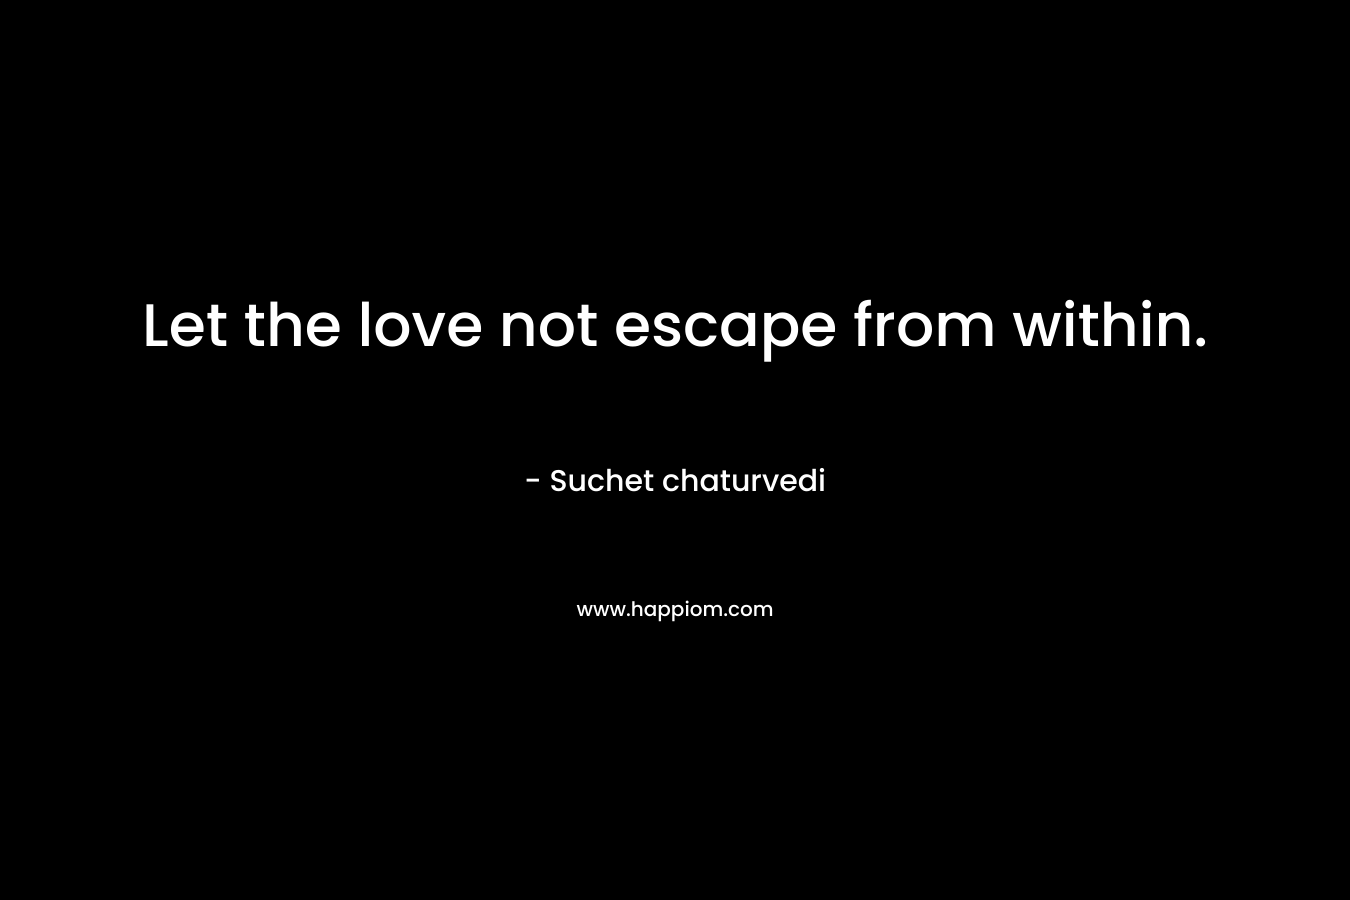 Let the love not escape from within. – Suchet chaturvedi